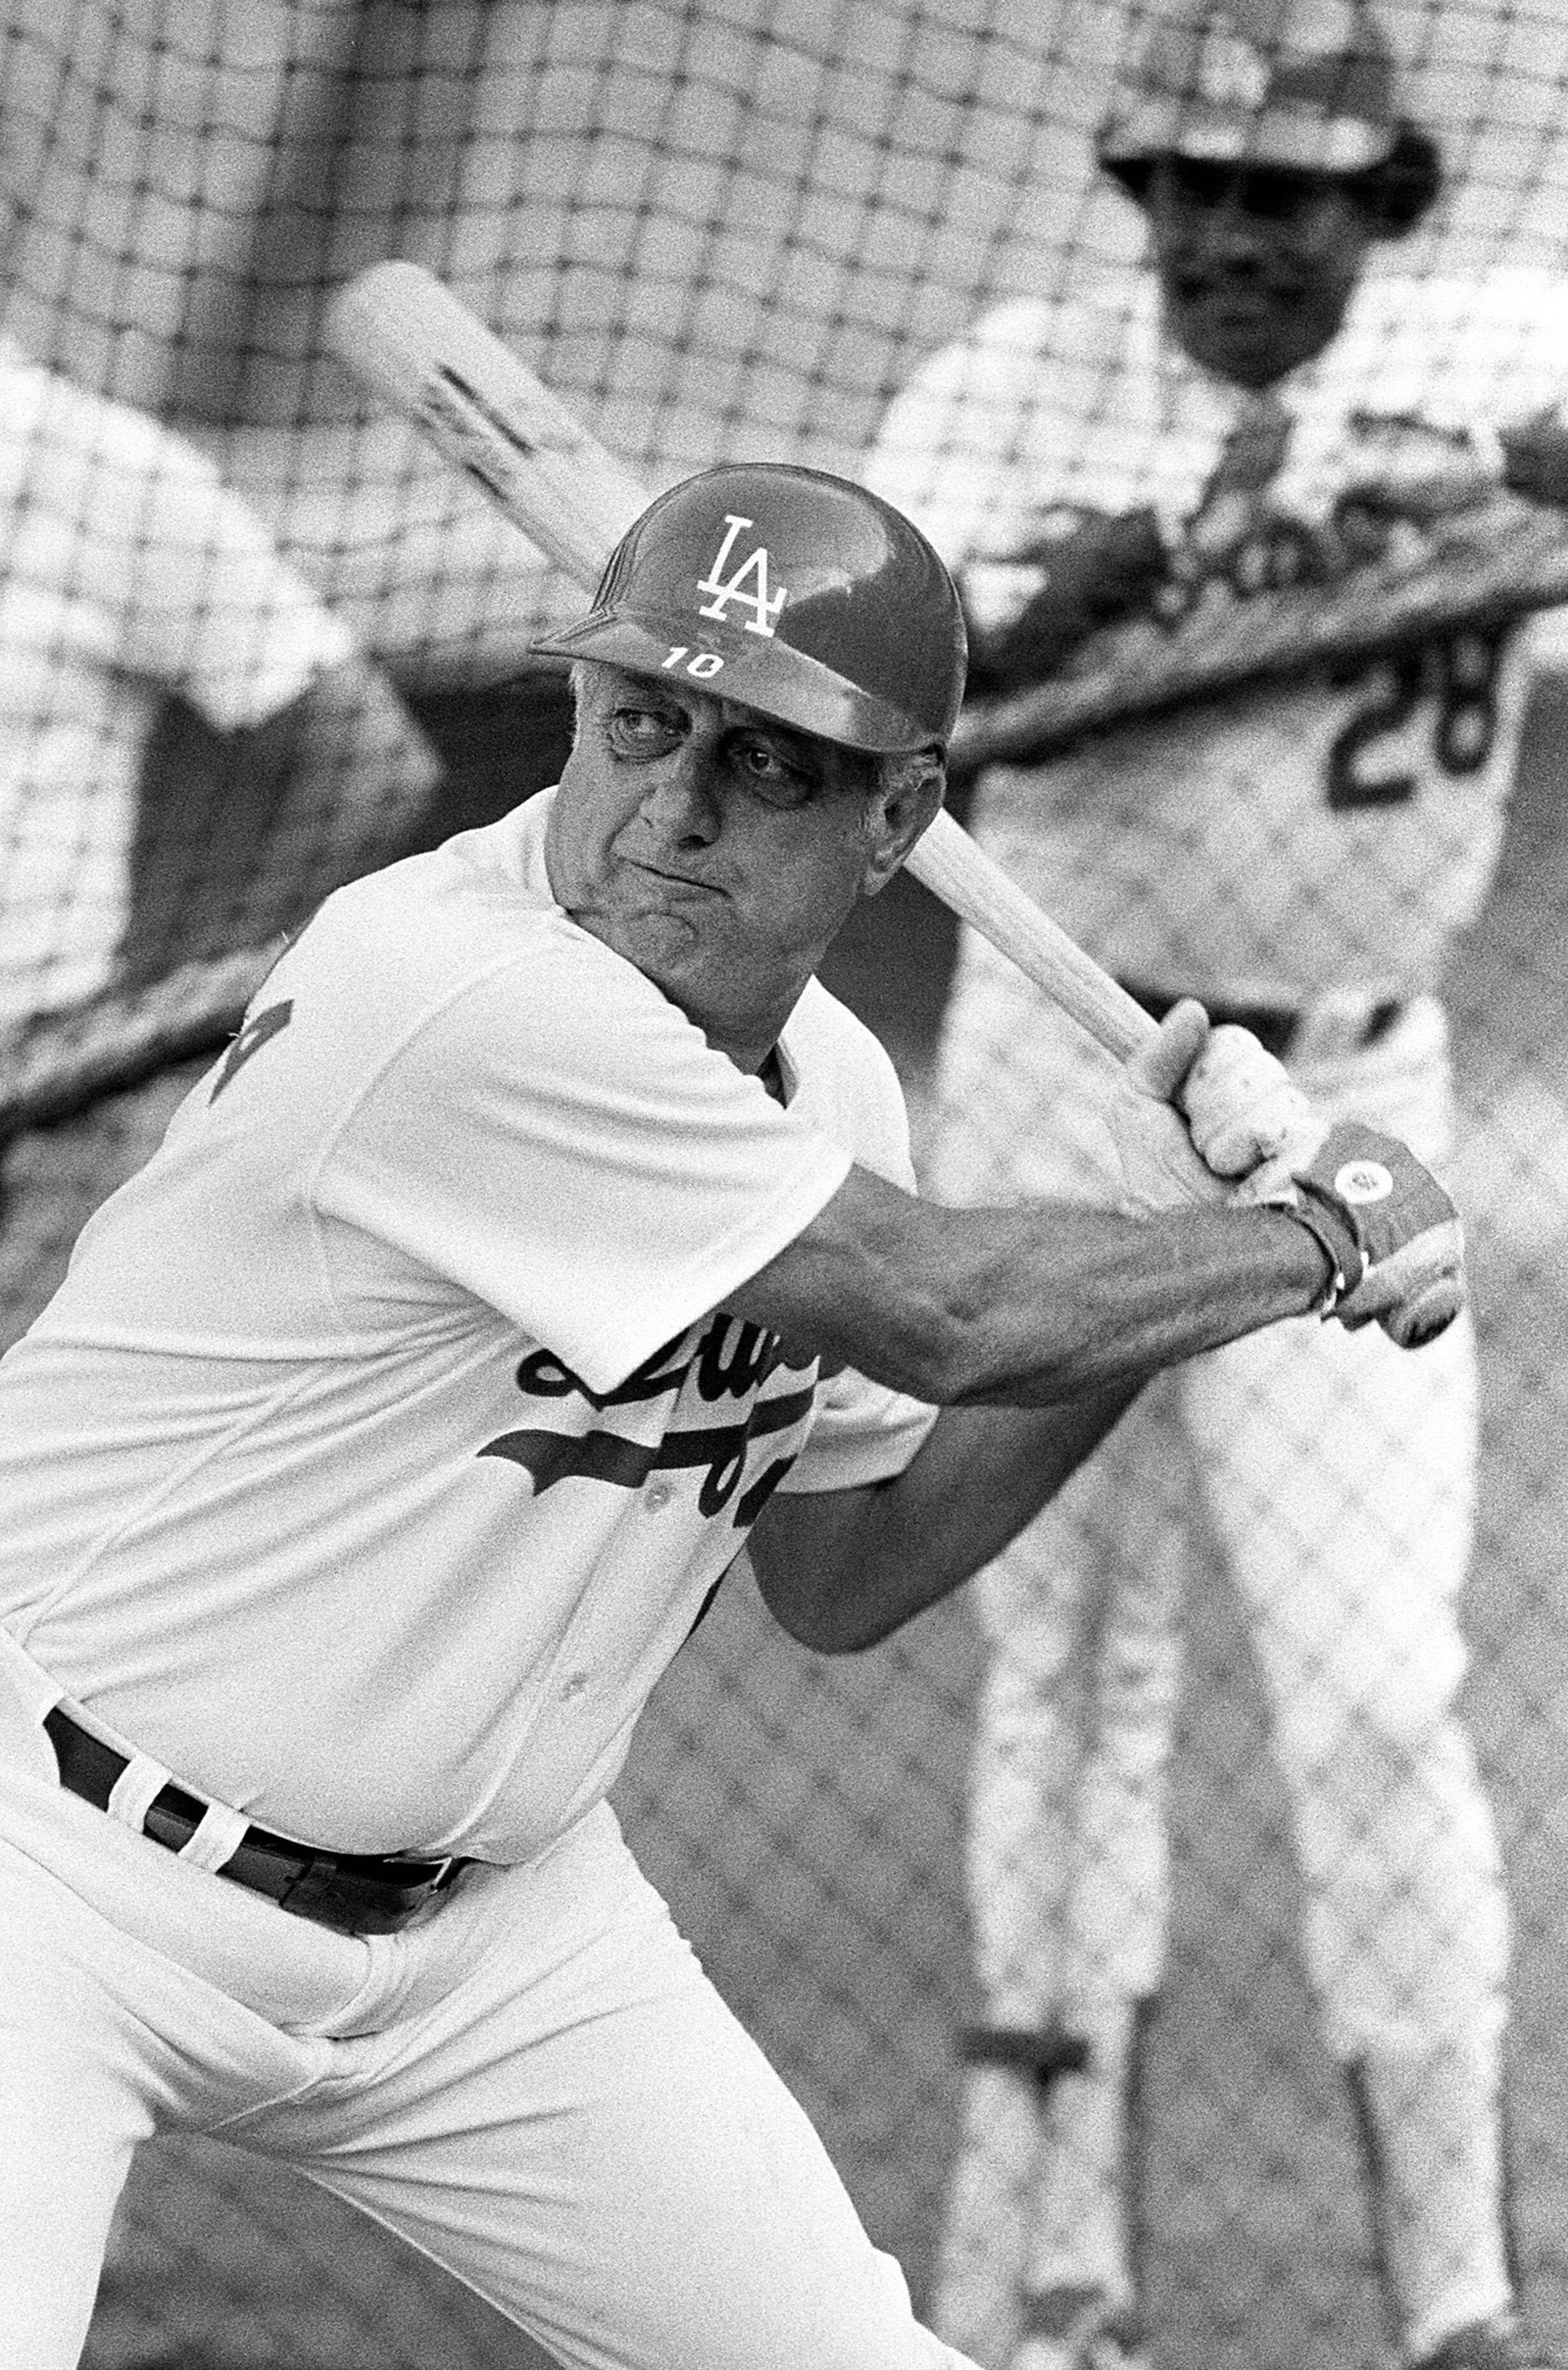  1989 Los Angeles, CA; USA;  FILE PHOTO Los Angeles Dodgers manager Tommy Lasorda (2) takes batting practice before a game at Dodger Stadium. Los Angeles Dodgers Pedro Guerrero (28) in background. Mandatory Credit: Jayne Kamin-Oncea-US PRESSWIRE 